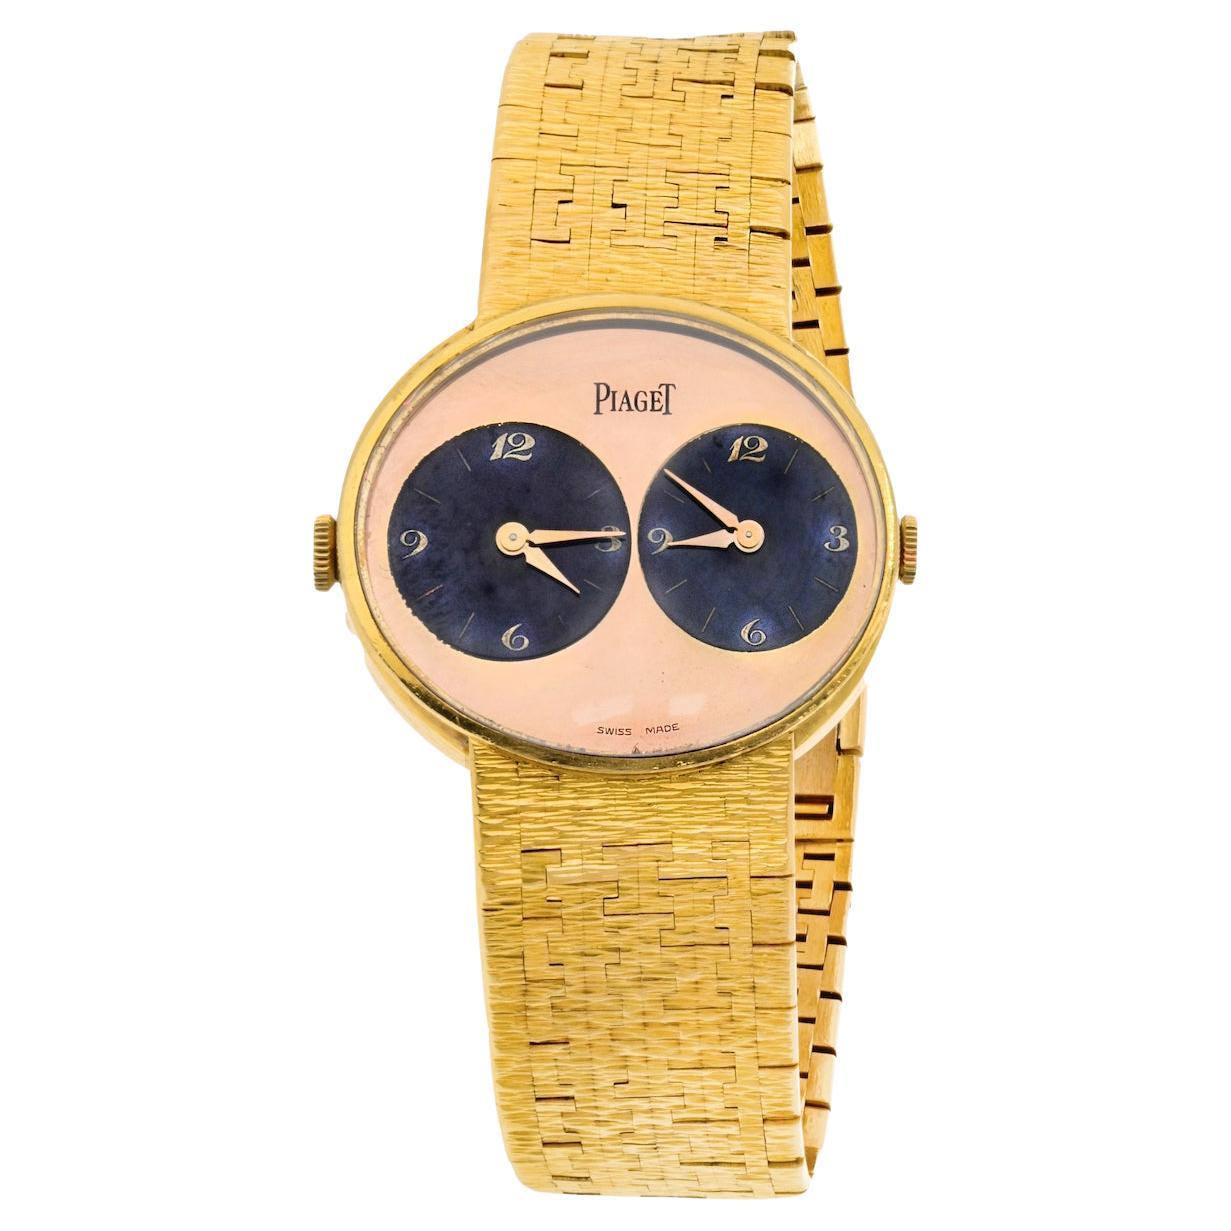 Piaget 18K Yellow Gold Duo Time Circa 1970's Watch For Sale